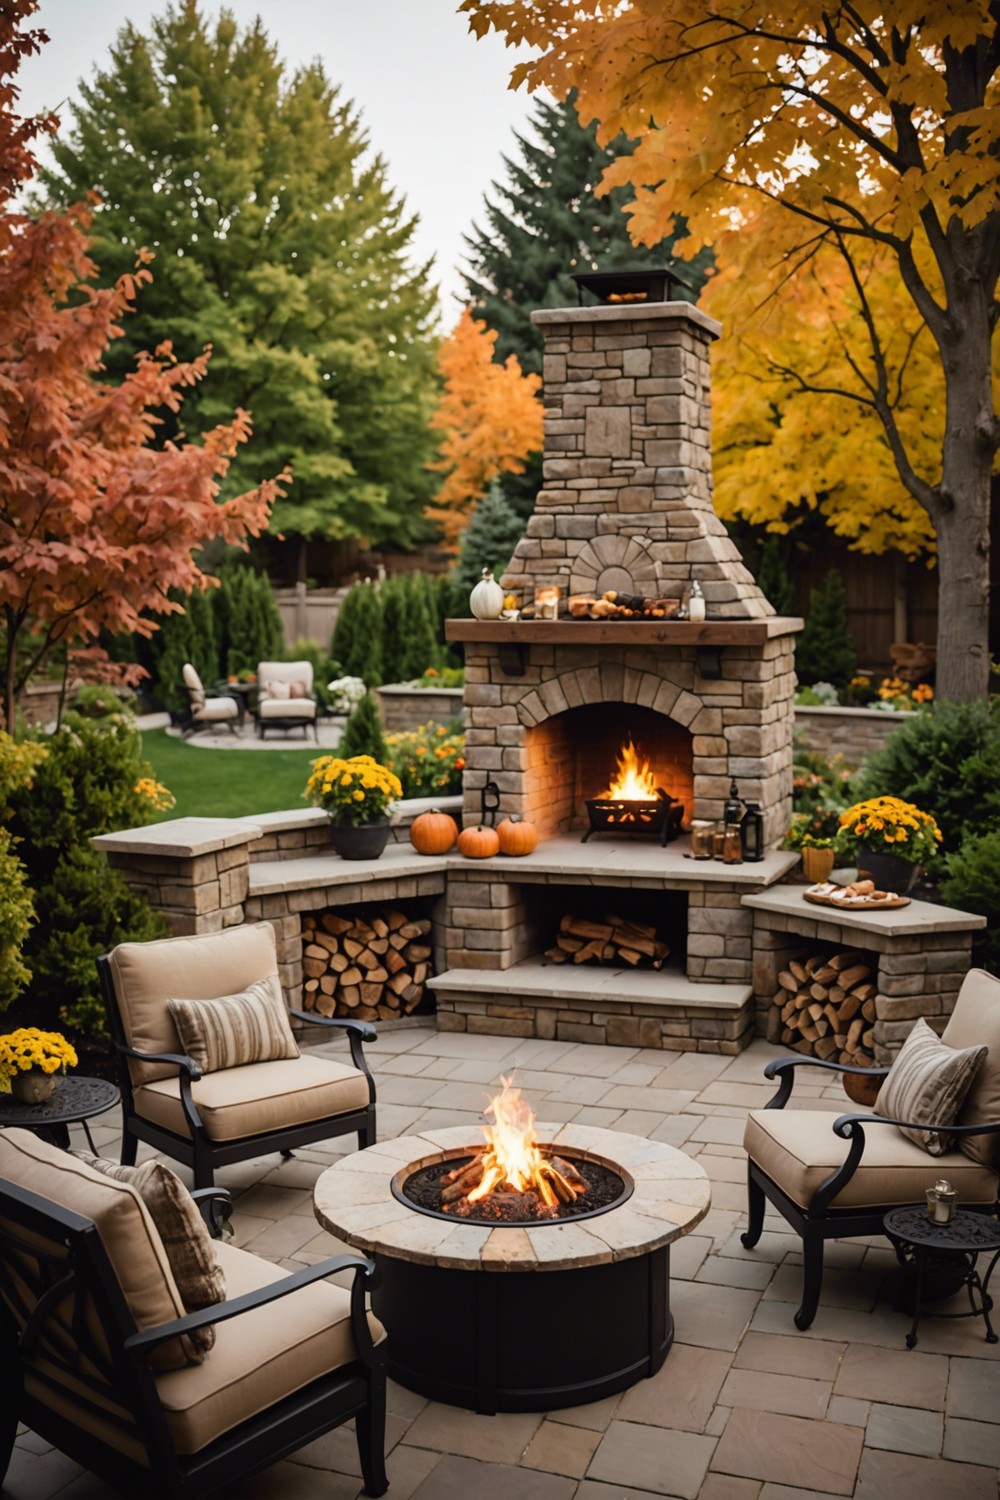 Fireplace with Built-In BBQ and Outdoor Kitchen